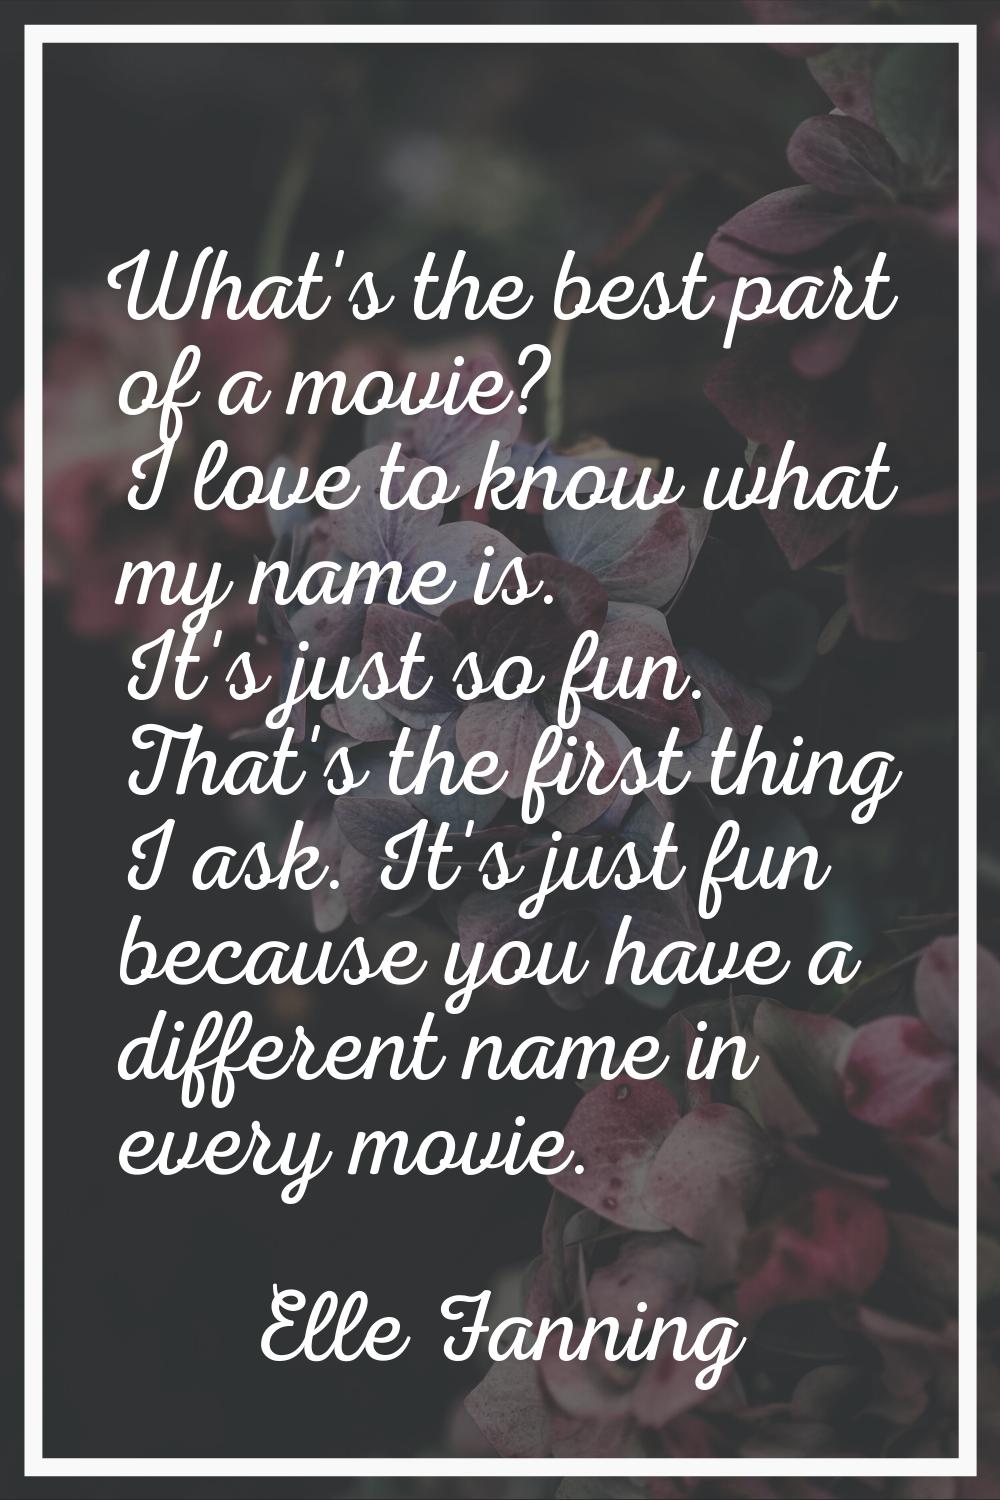 What's the best part of a movie? I love to know what my name is. It's just so fun. That's the first